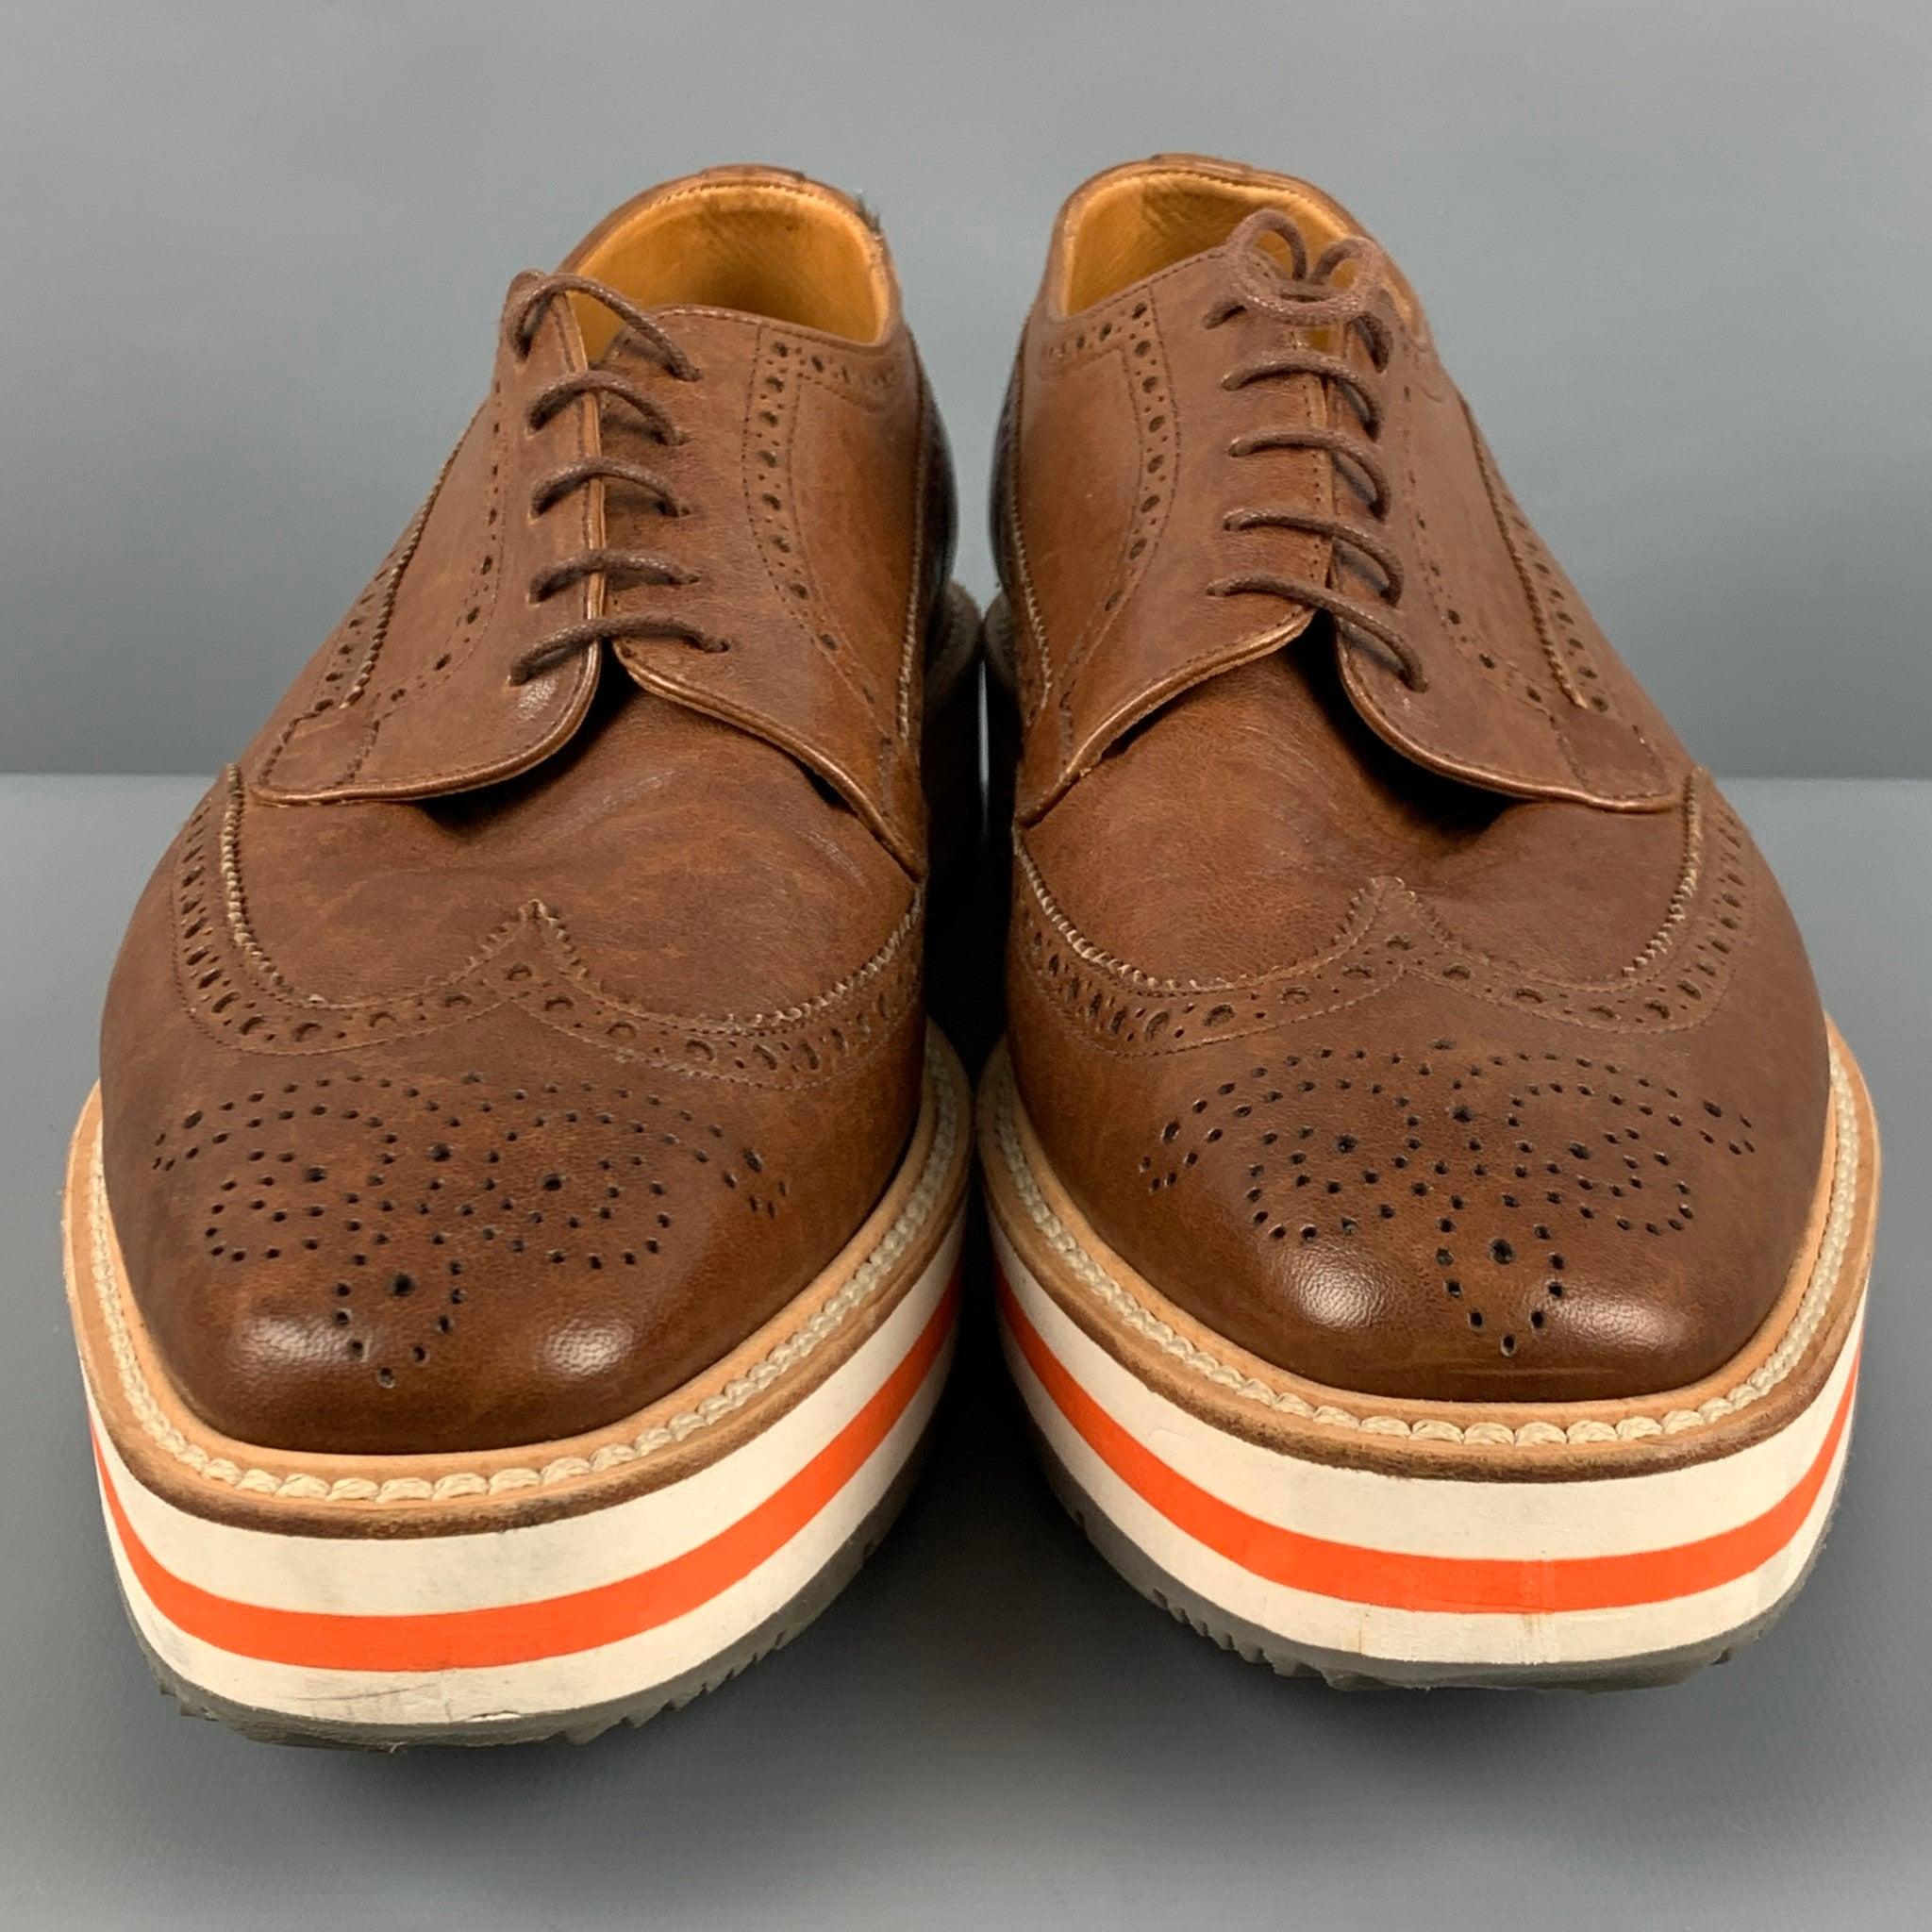 Men's PRADA Size 9.5 Brown Perforated Leather Wingtip Lace Up Shoes For Sale